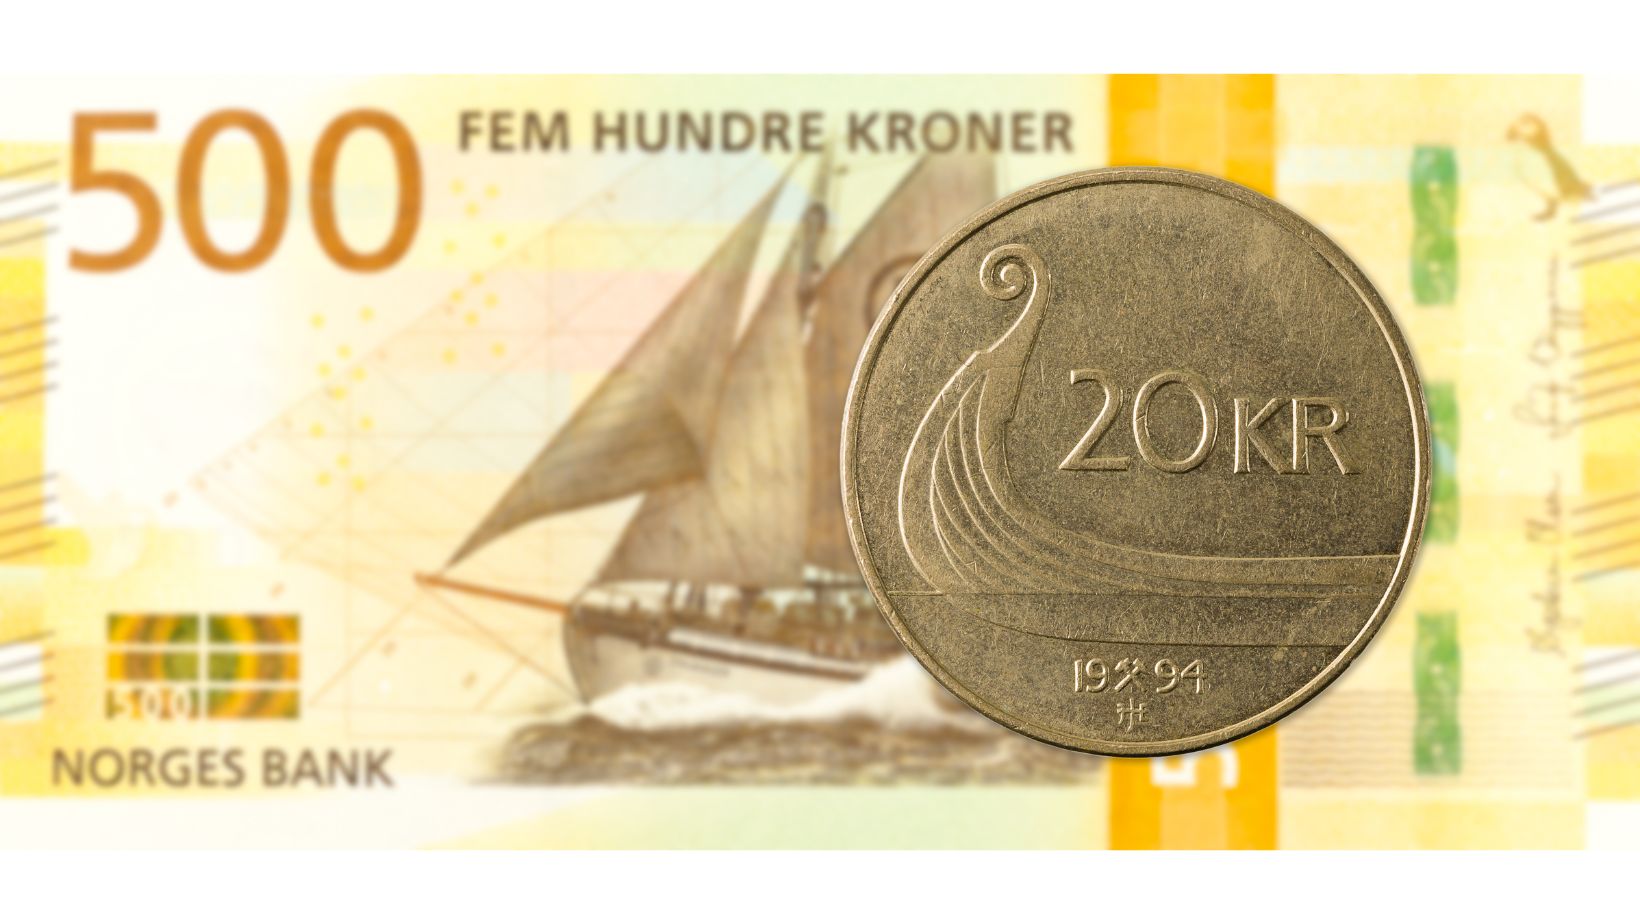 500 NOK banknote and 20 NOK coin